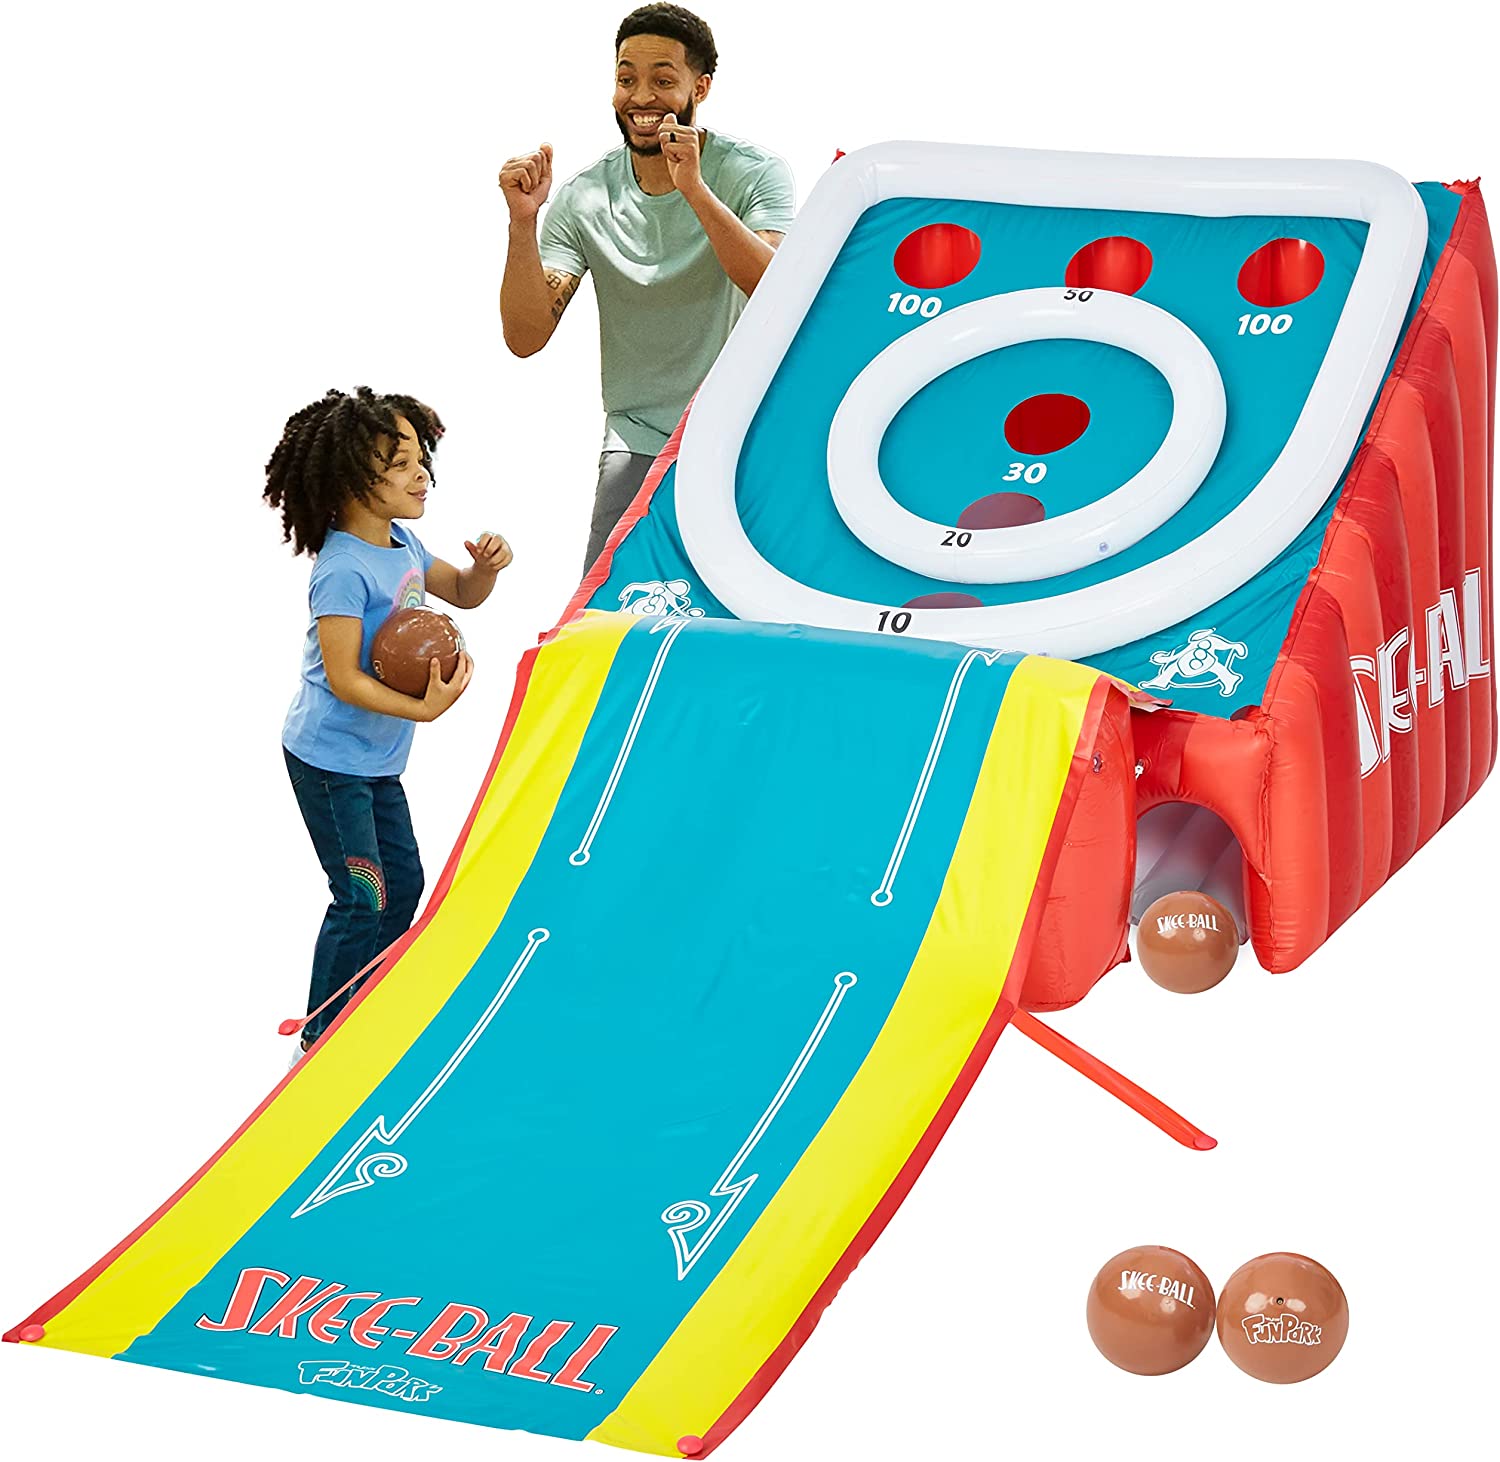 FunPark Inflatable Skee-Ball Game for Kids and Adults